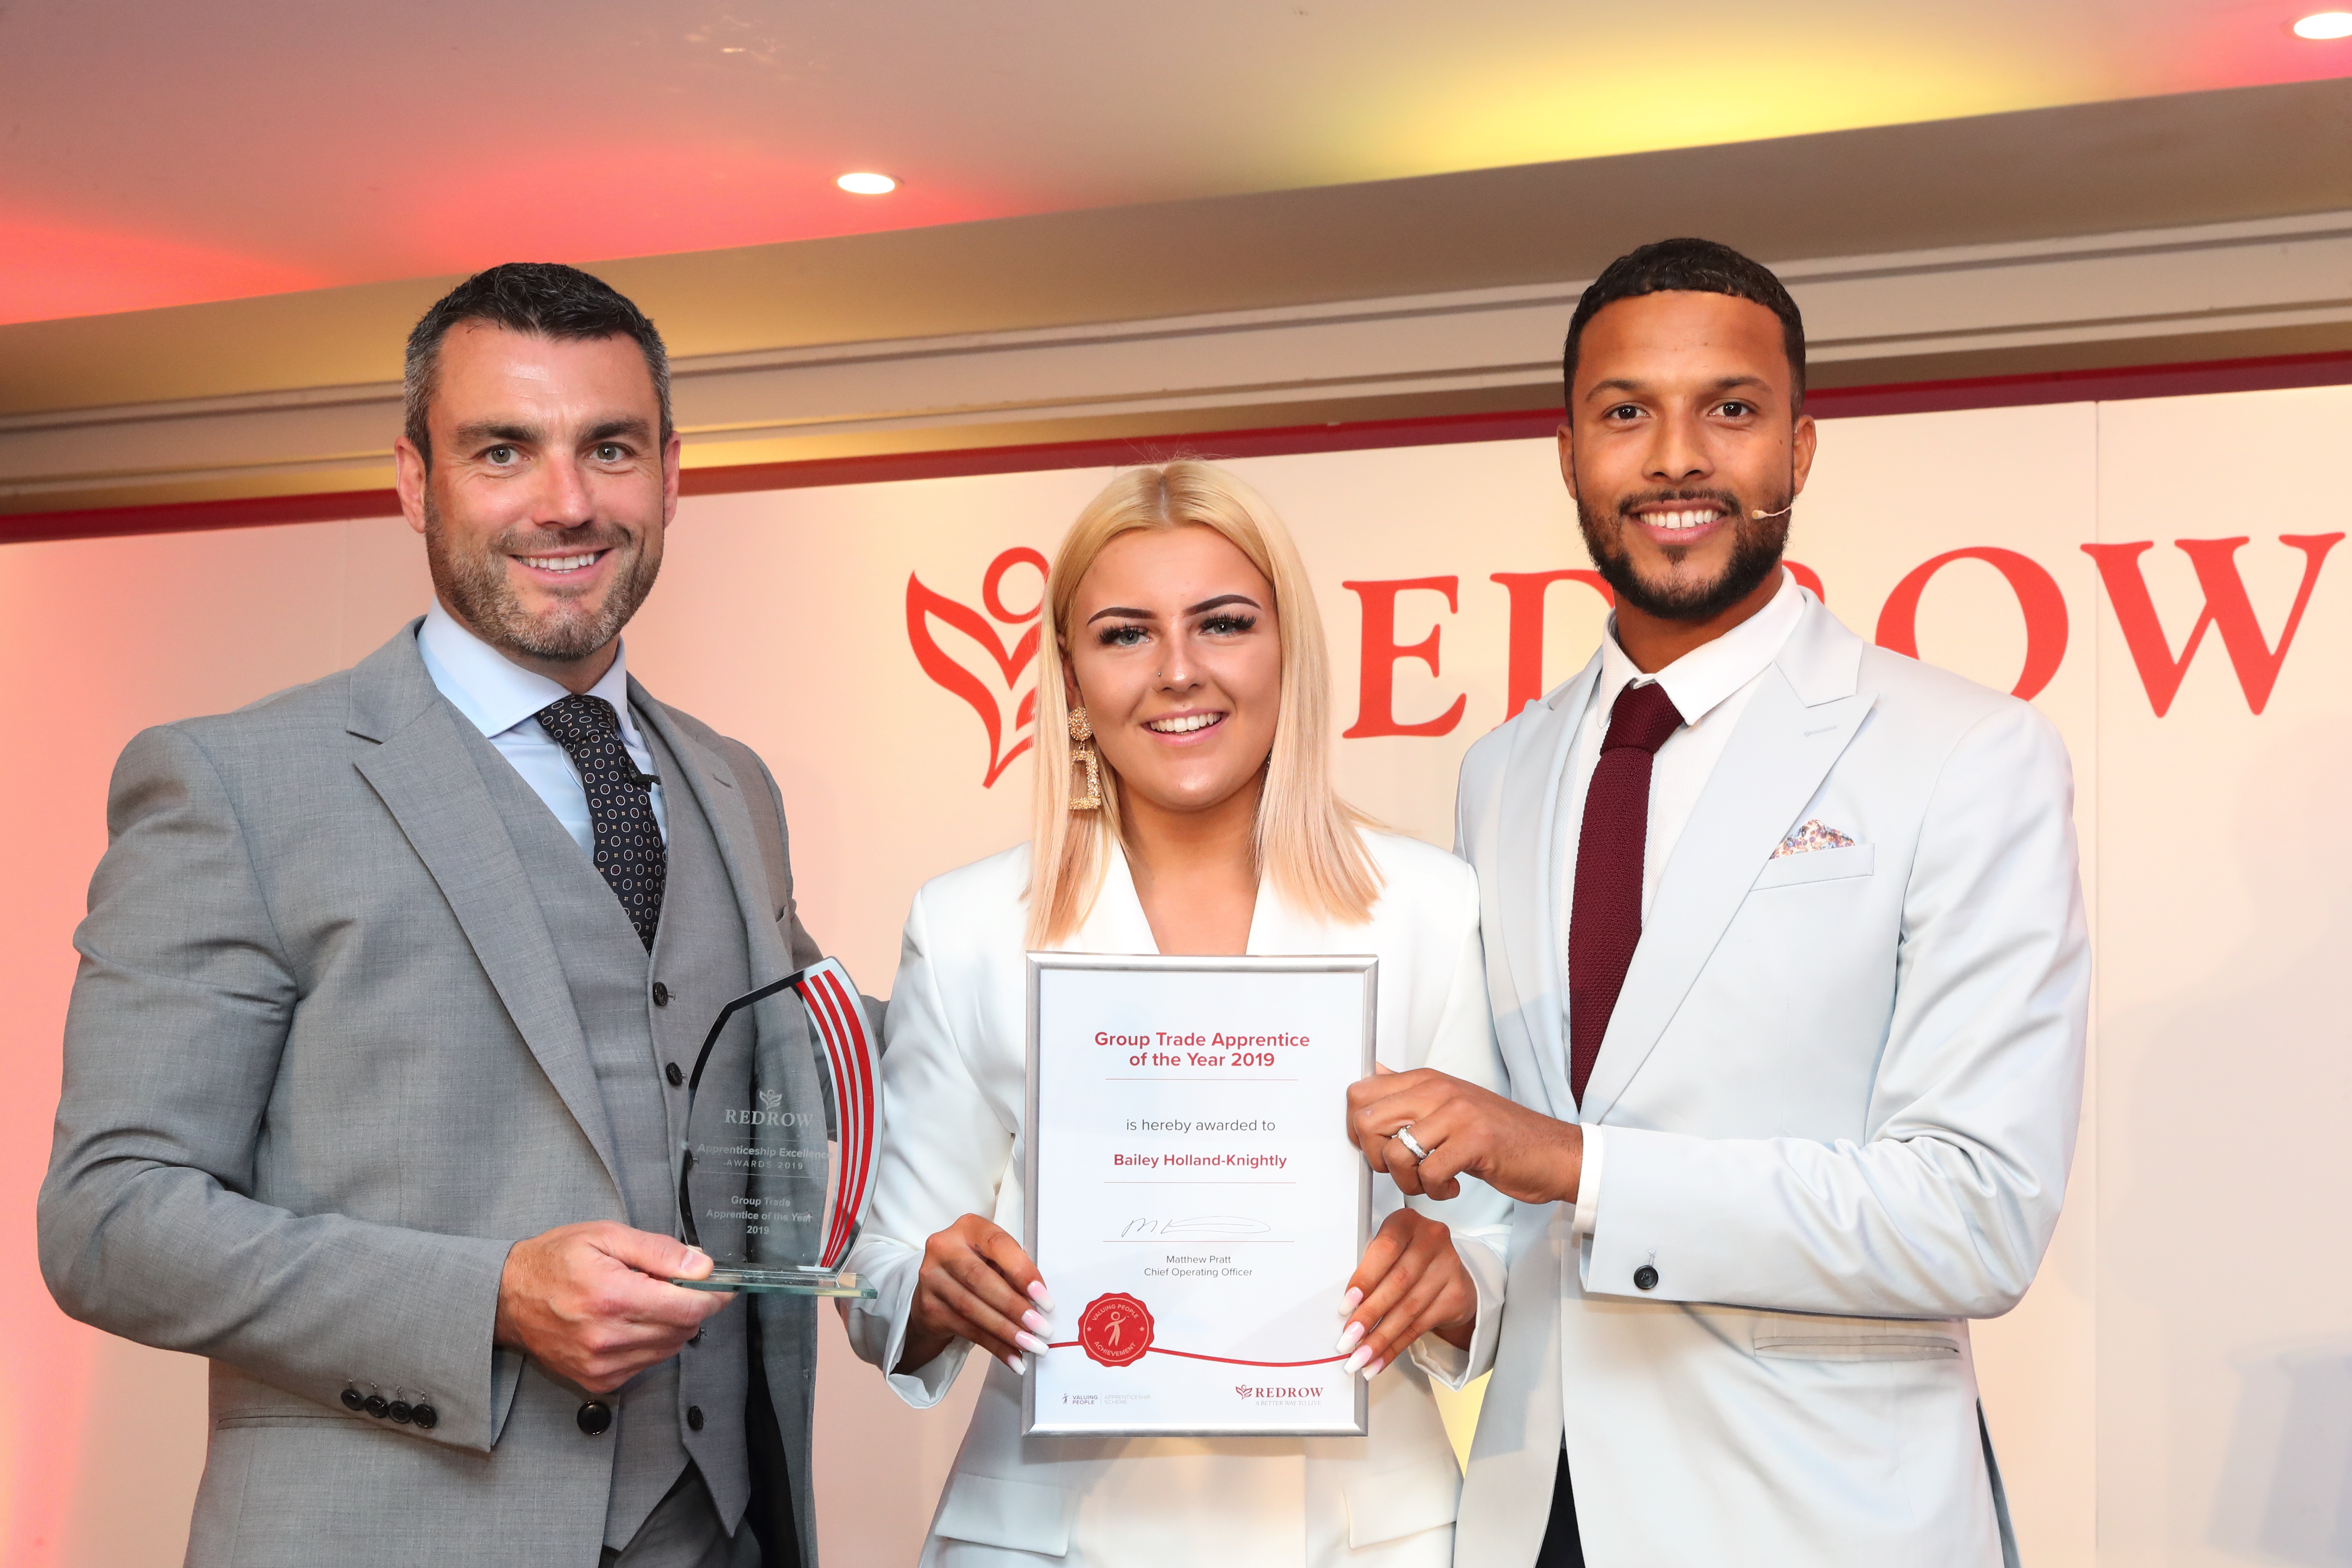 Apprentice success celebrated at Redrow’s apprenticeship awards @RedrowHomes